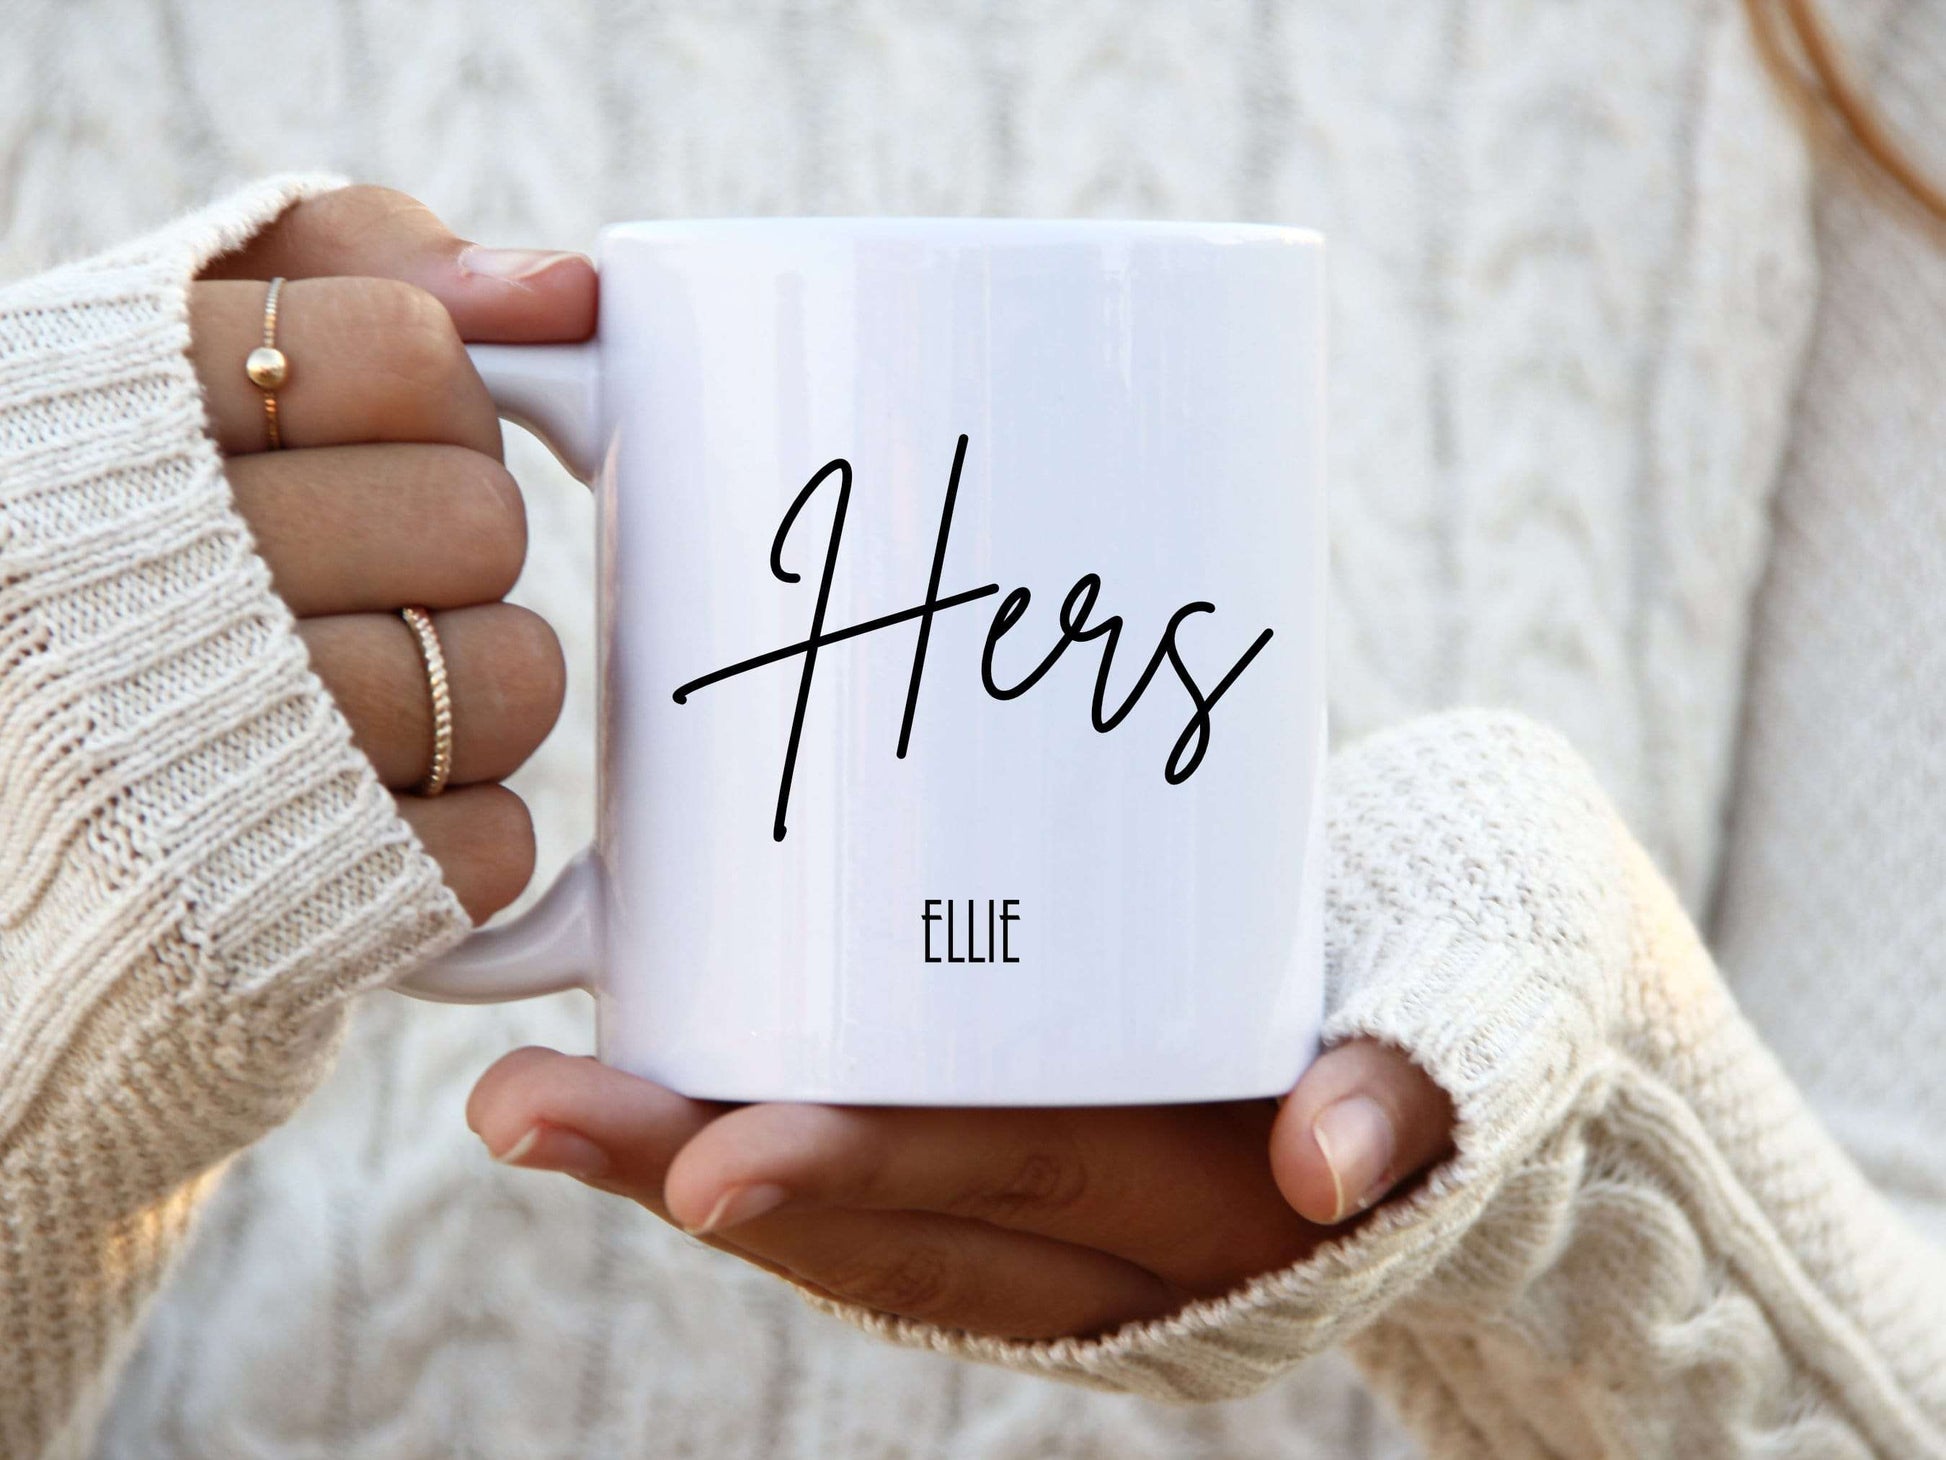 woman holding a white mug with the text Hers in a script font printed on it with a name below